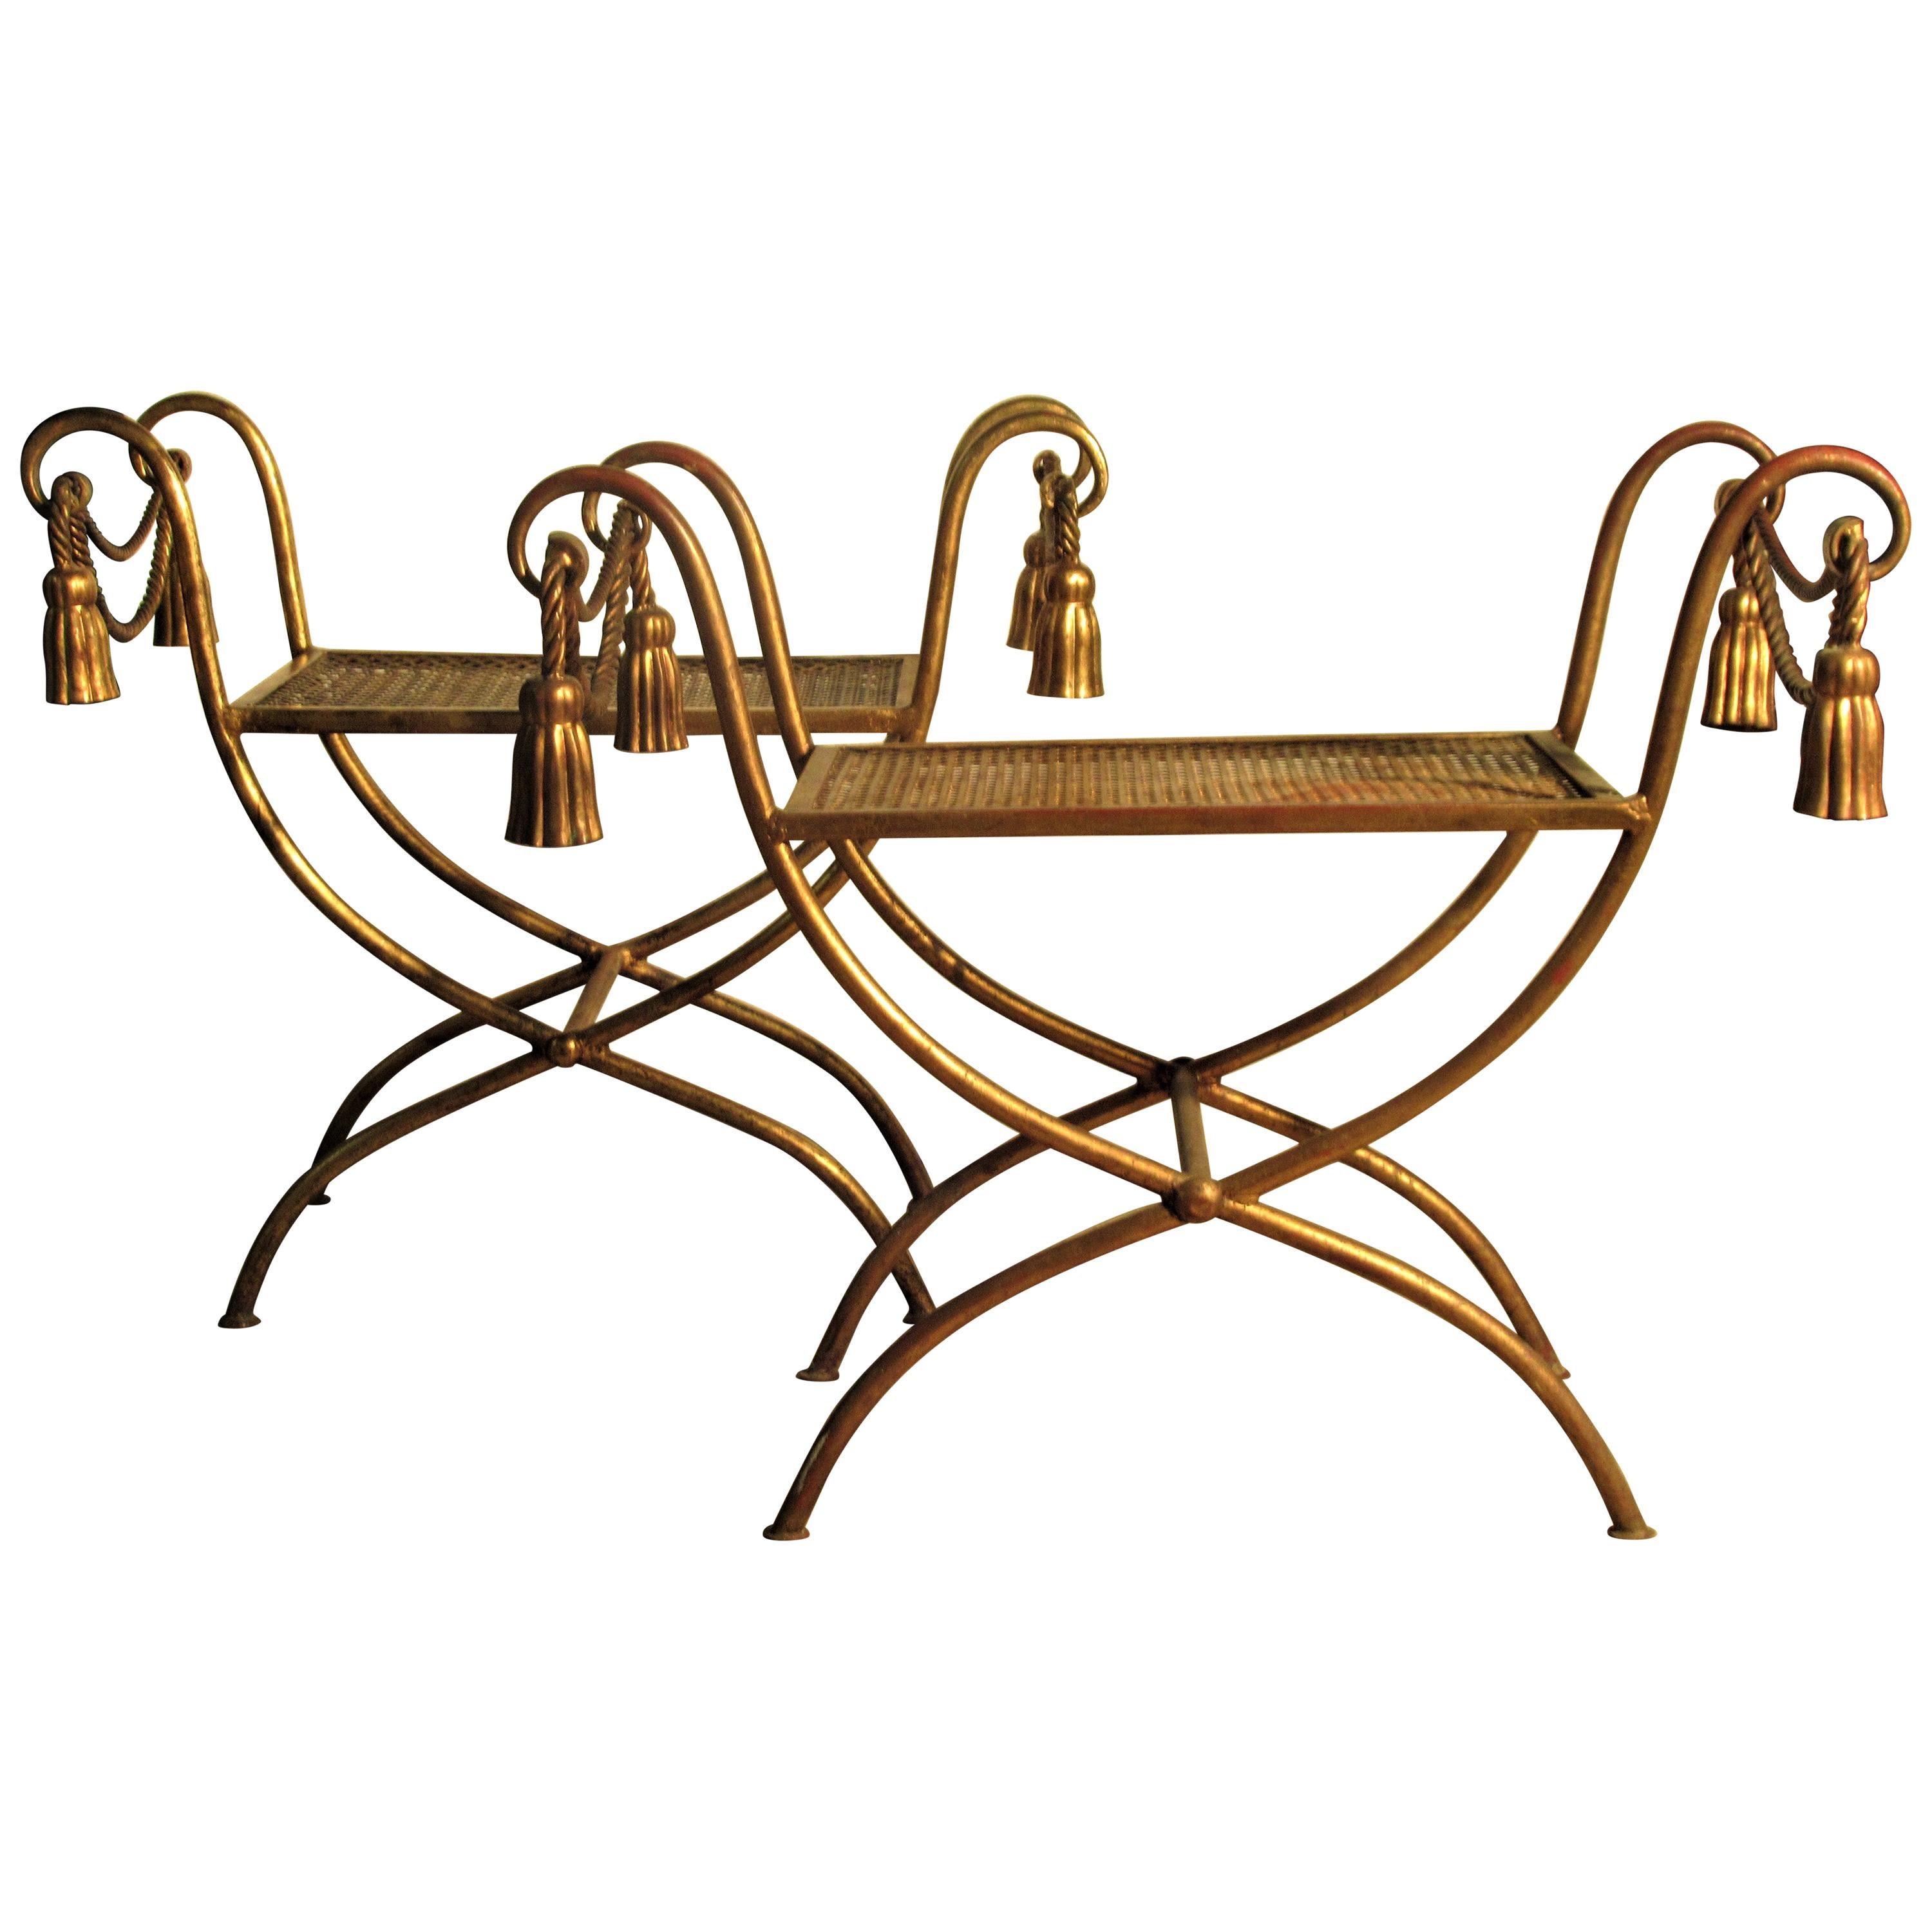 Italian Gilt Metal Rope and Tassel Benches